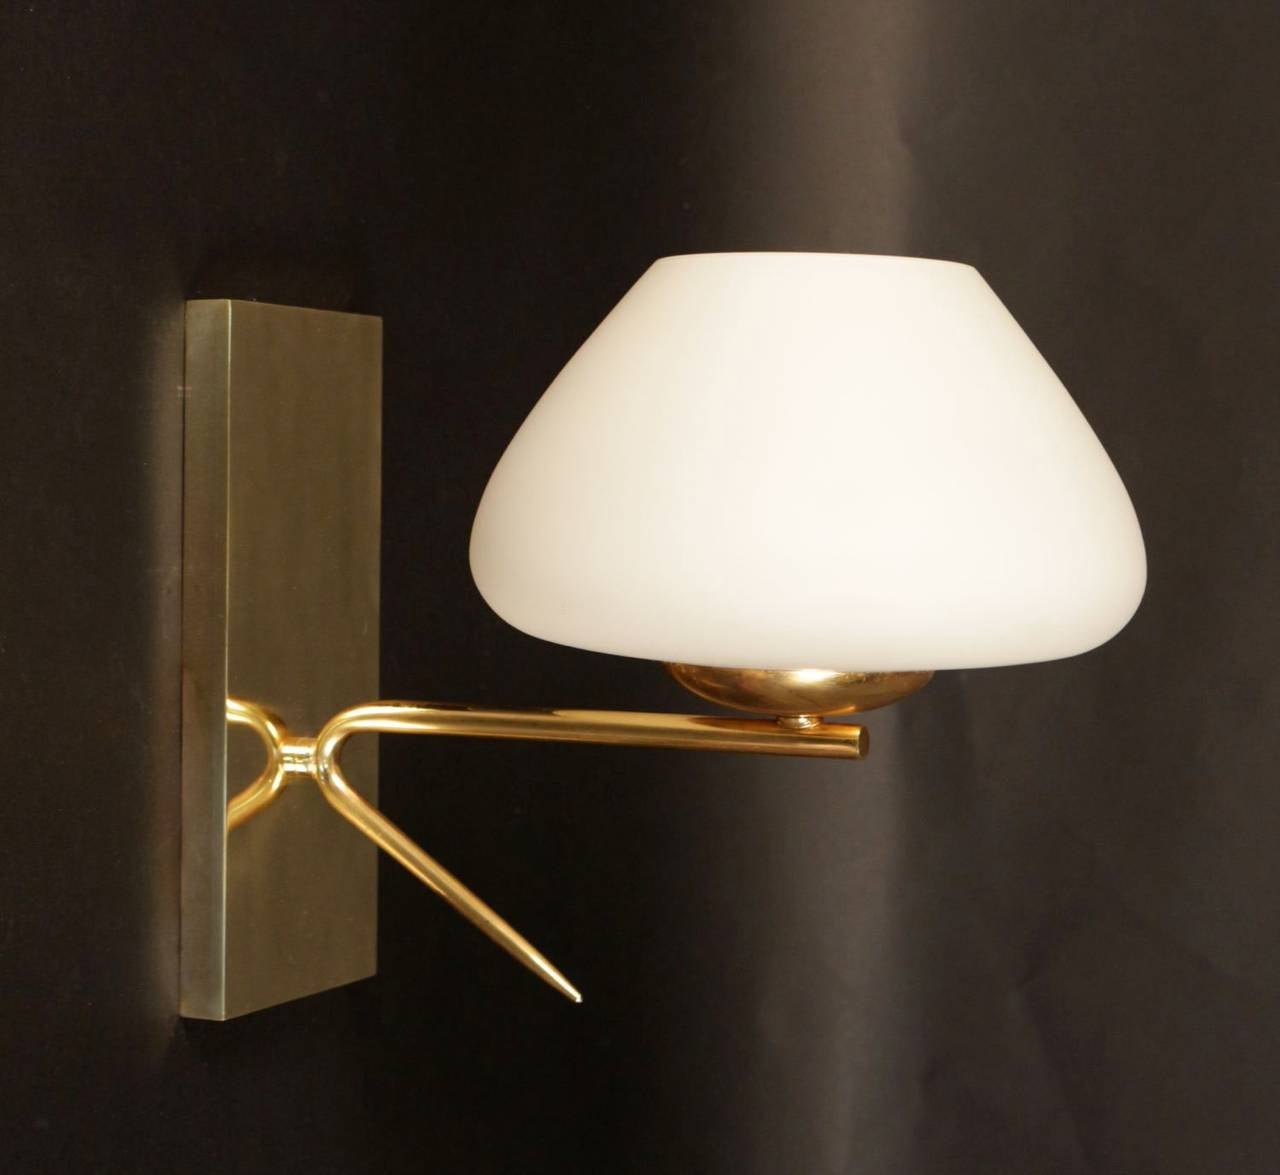 Pair of 1950s Stilnovo sconces in gilt brass embellished with an opaline cup. One lighted arm per sconce.